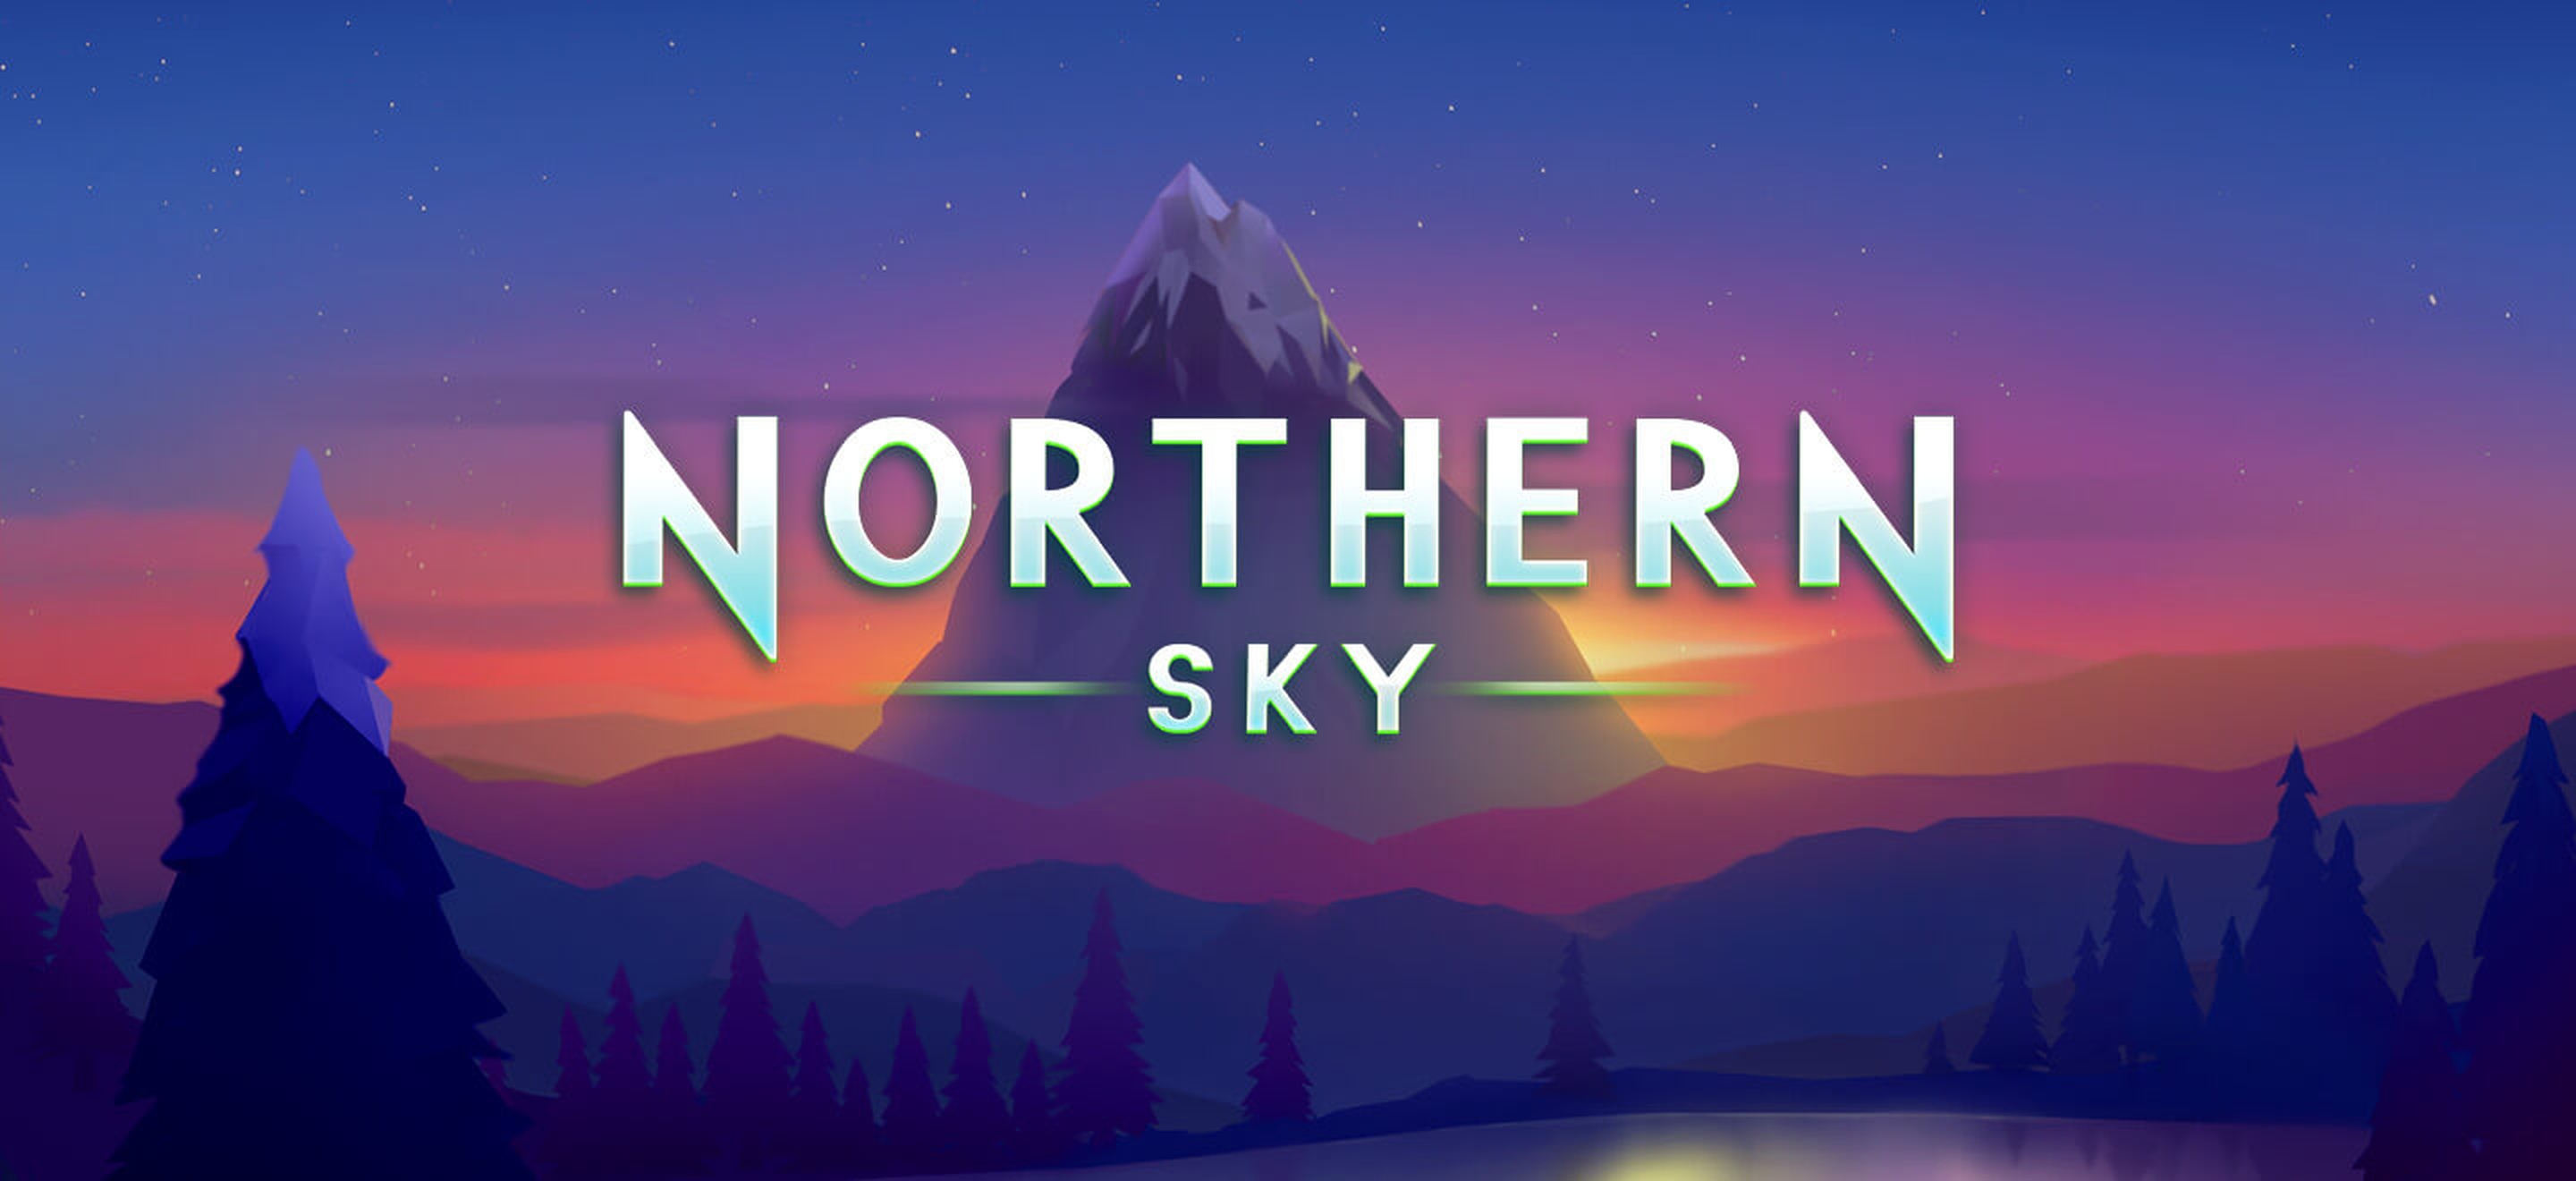 The Northern Sky Online Slot Demo Game by Quickspin